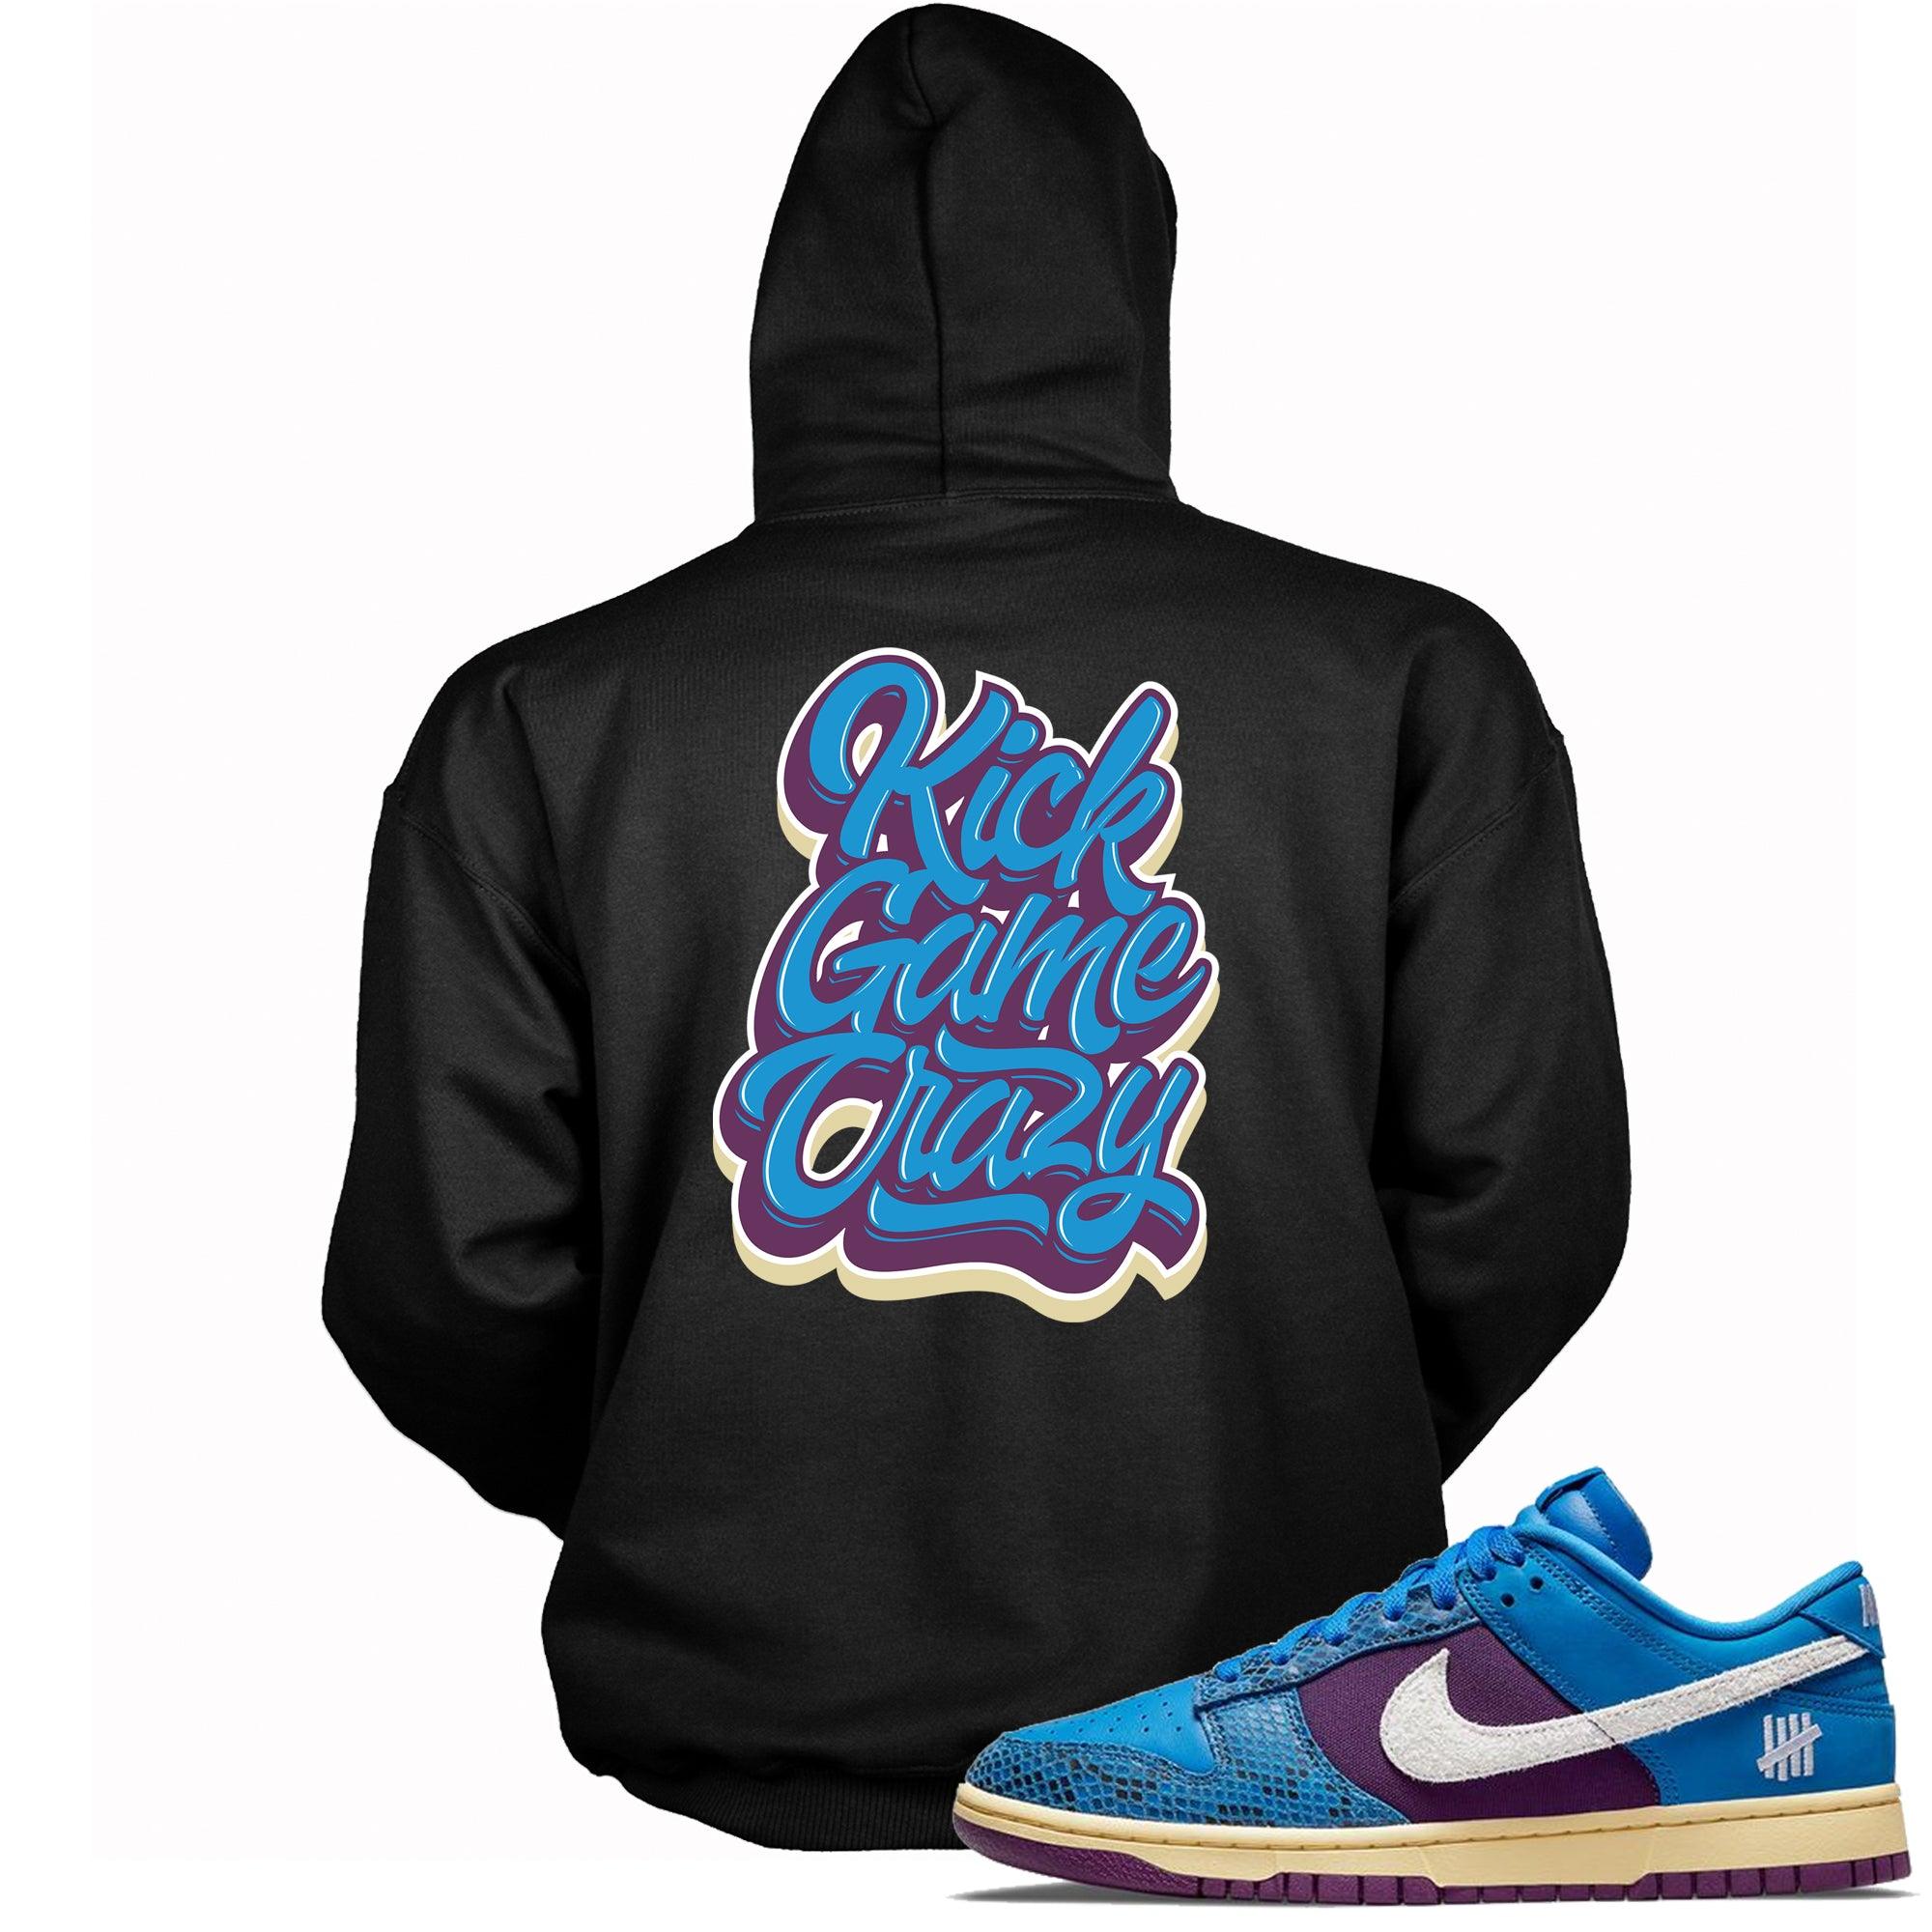 Kick Game Crazy Hoodie Nike Dunk Low Undefeated 5 On It Dunk vs AF1 Sneakers photo